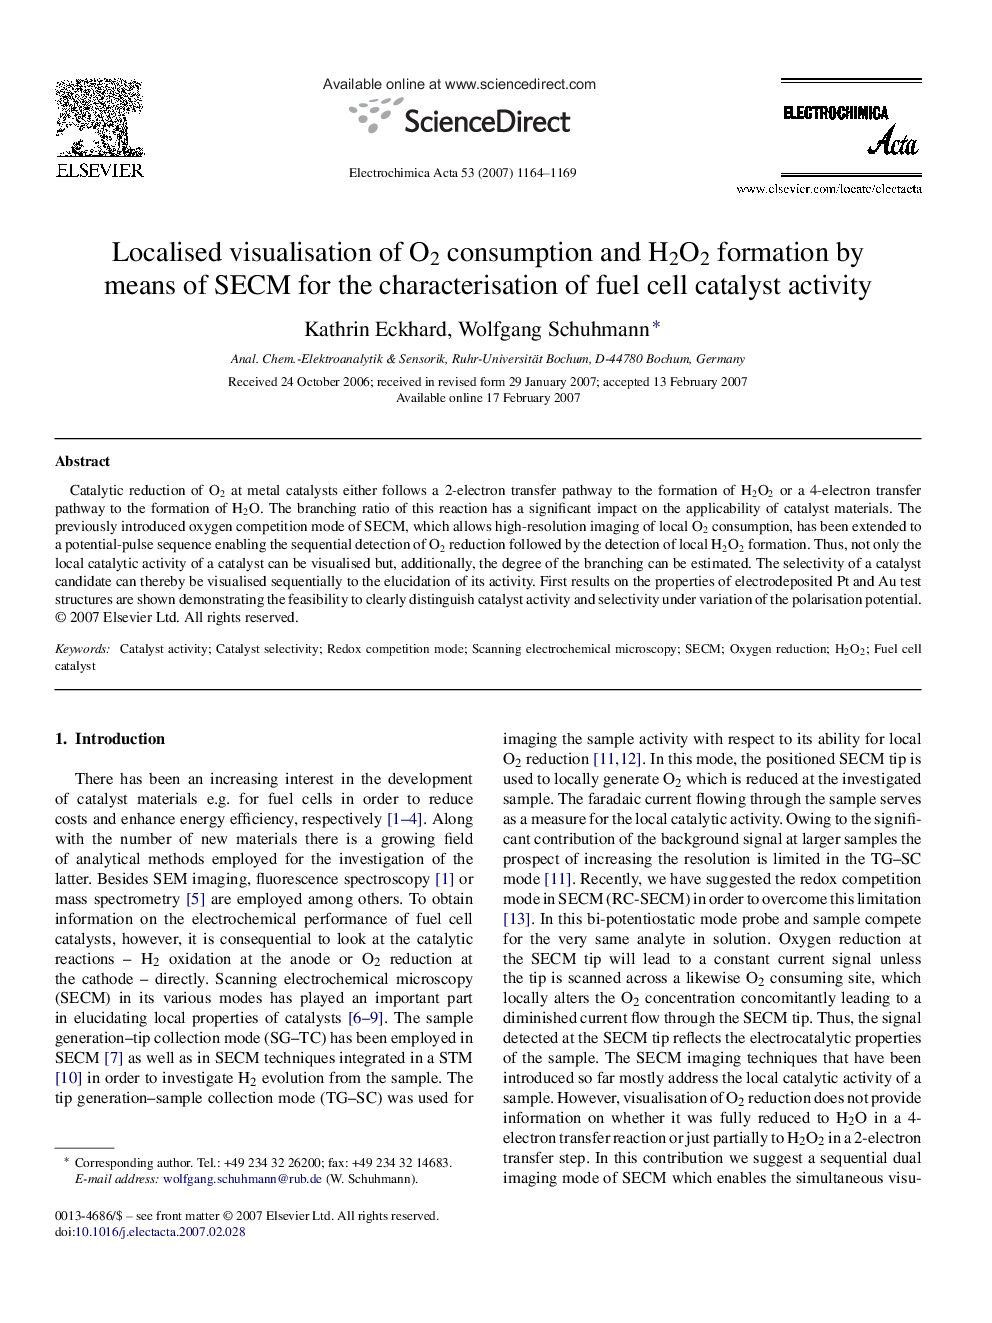 Localised visualisation of O2 consumption and H2O2 formation by means of SECM for the characterisation of fuel cell catalyst activity